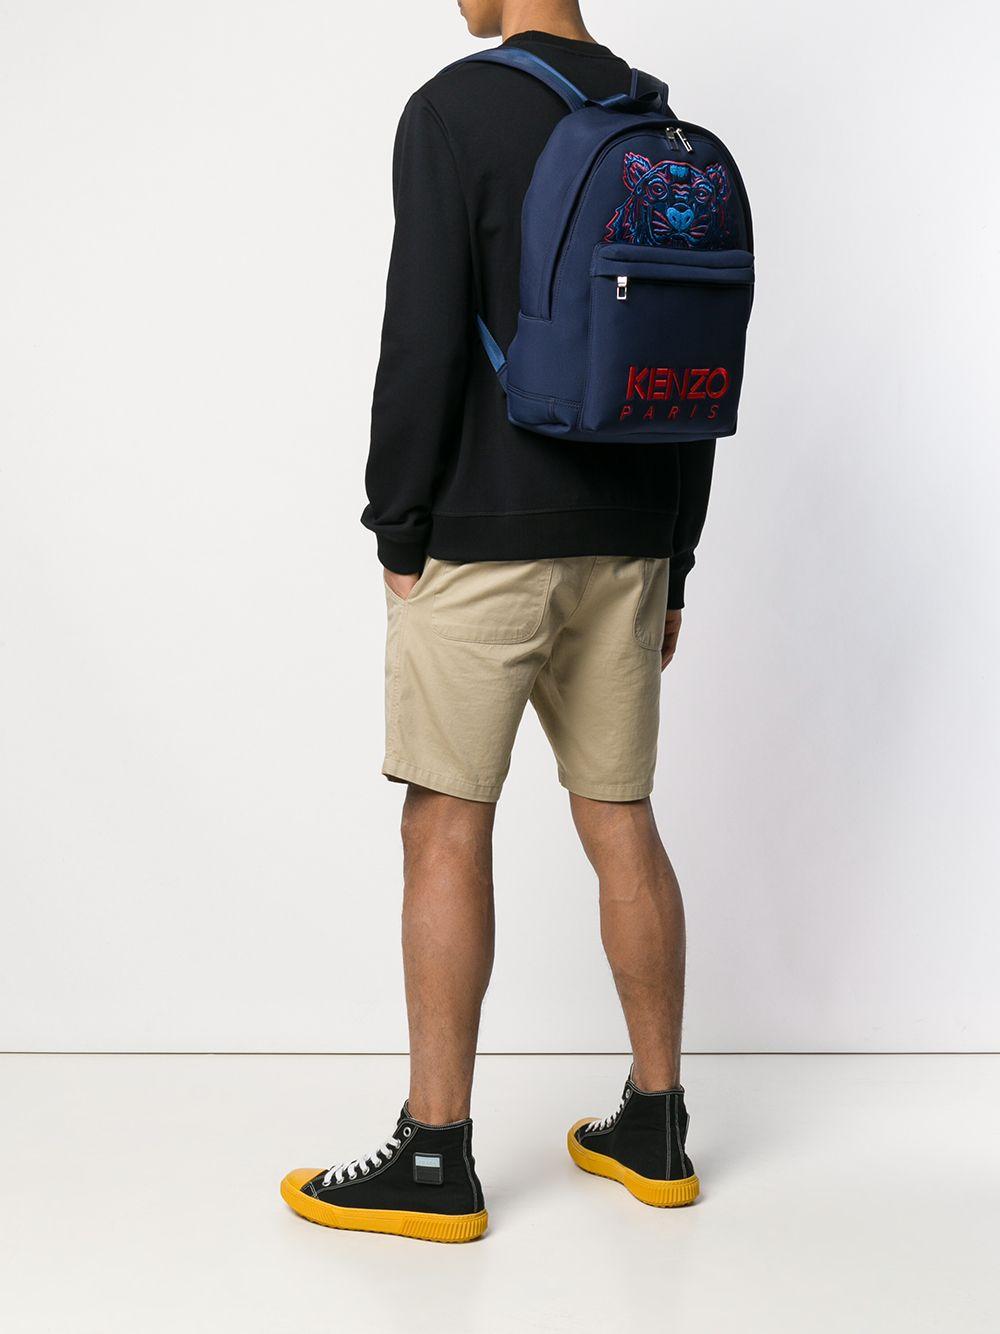 KENZO Synthetic Embroidered Tiger Logo Backpack Navy/red in Blue 